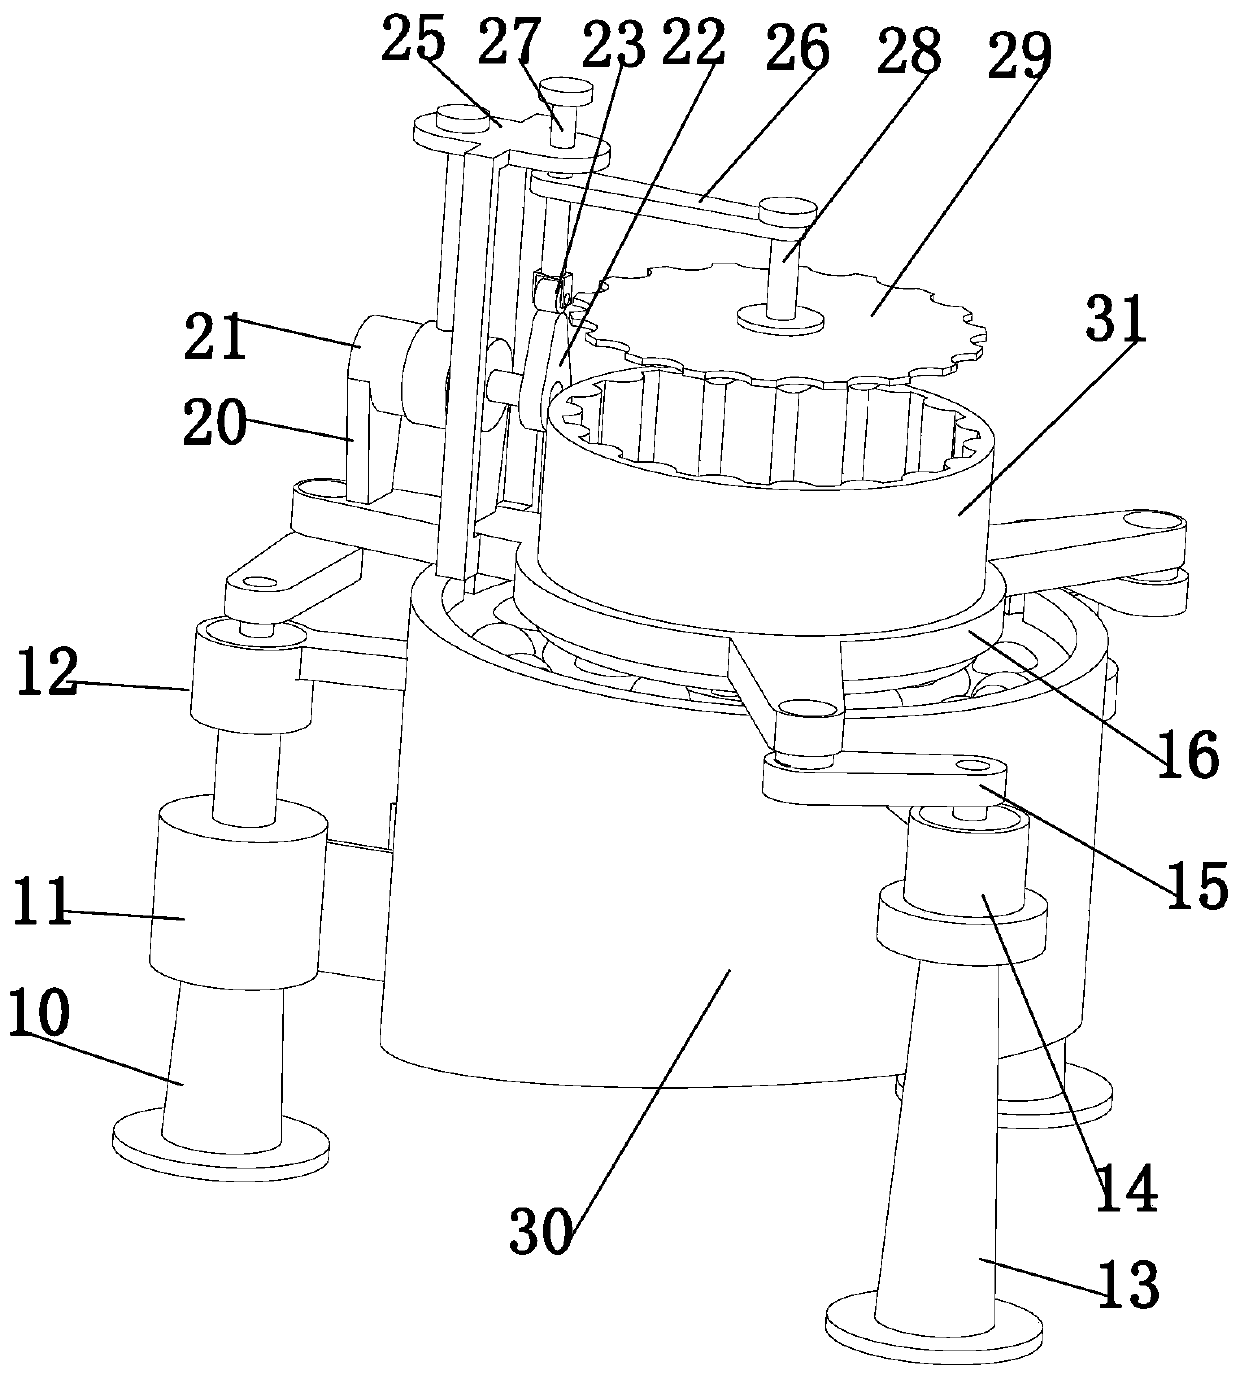 Tumbling device for pickling products